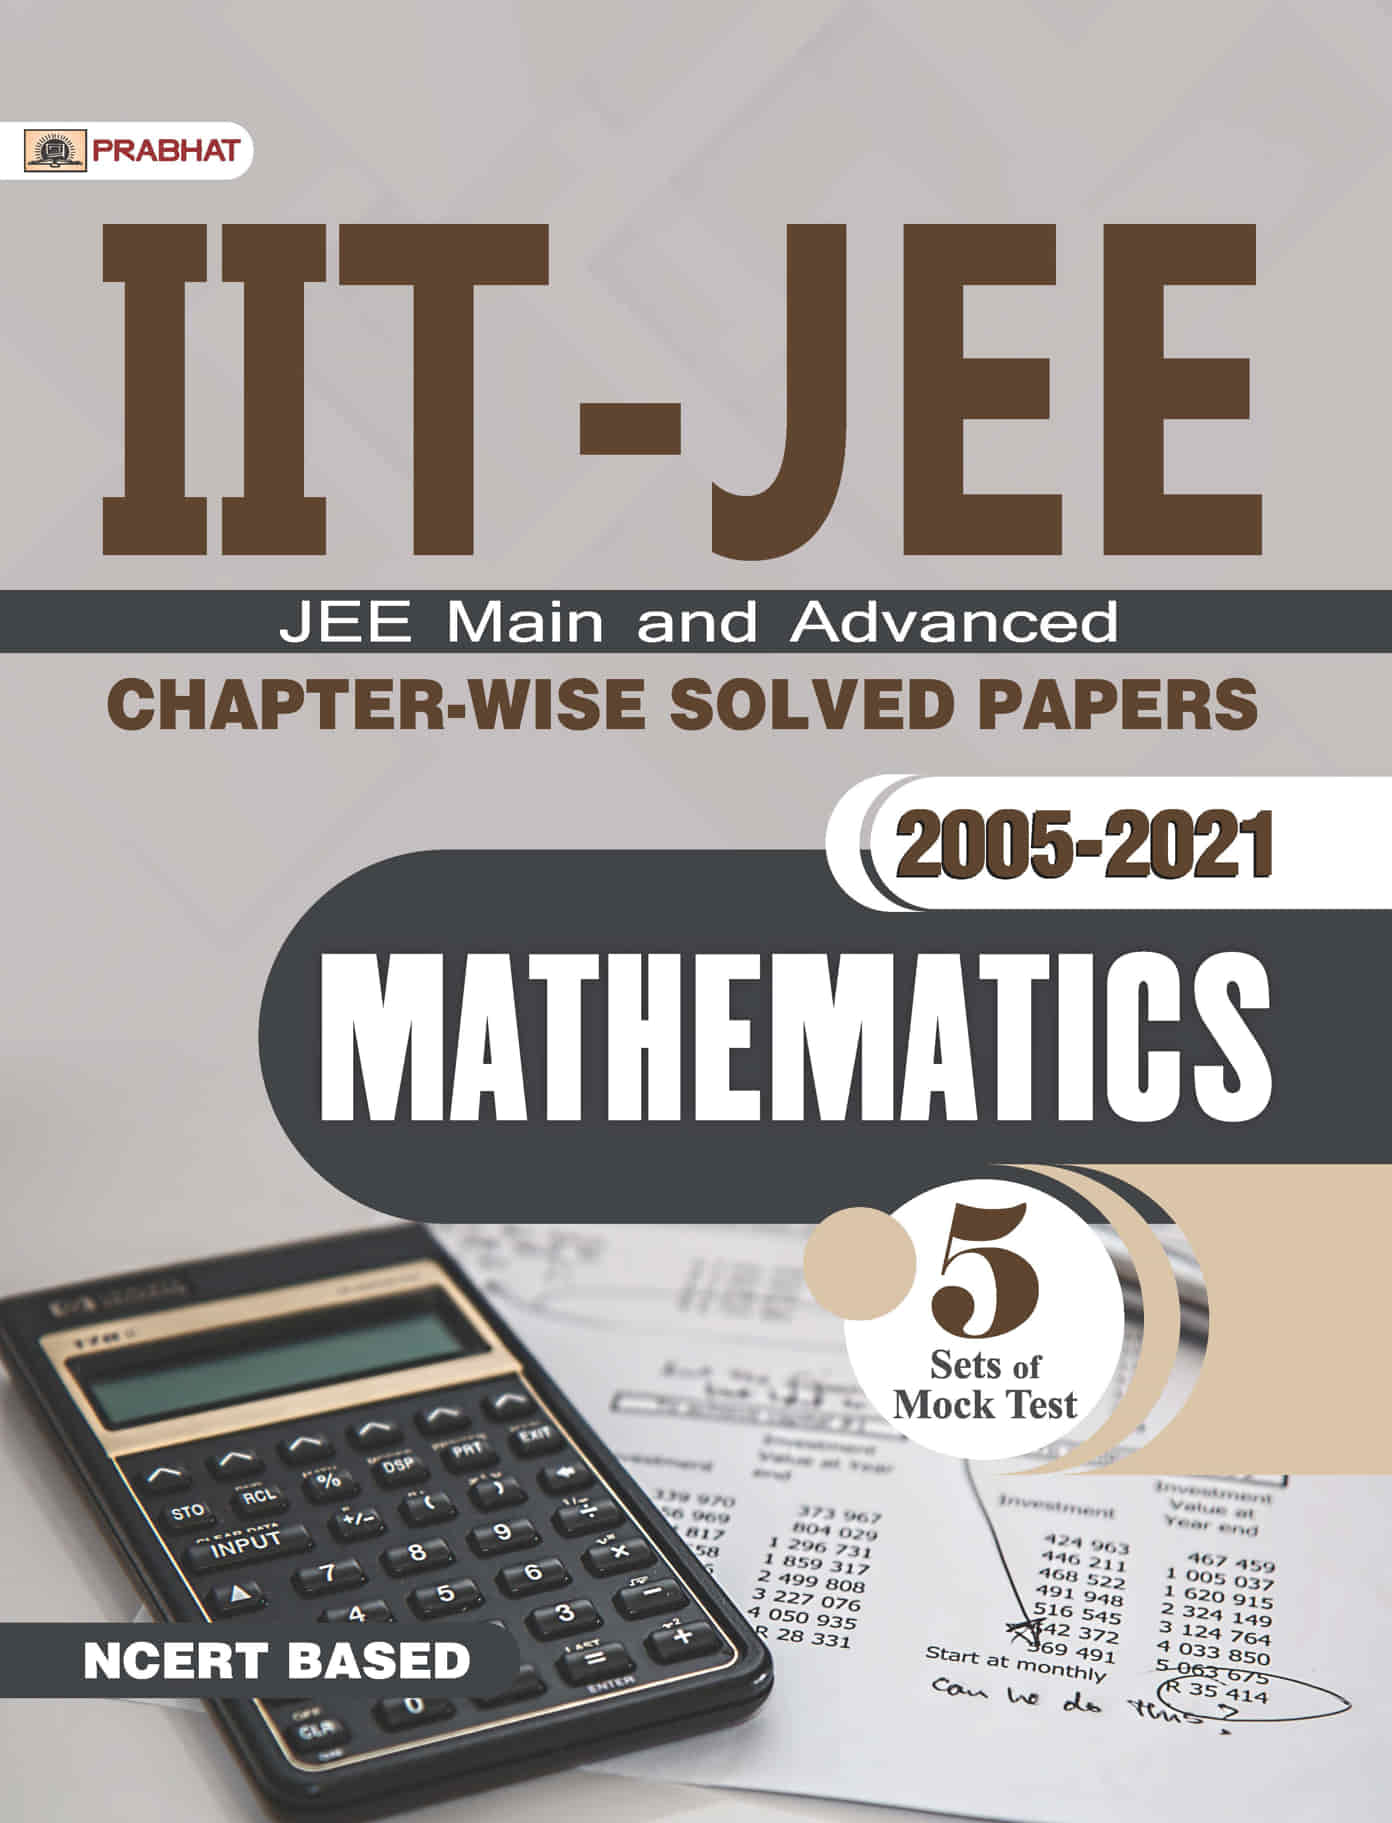 IIT-JEE Main & Advanced Chapter-Wise Solved Papers: 2005-2021 Mathemat... 